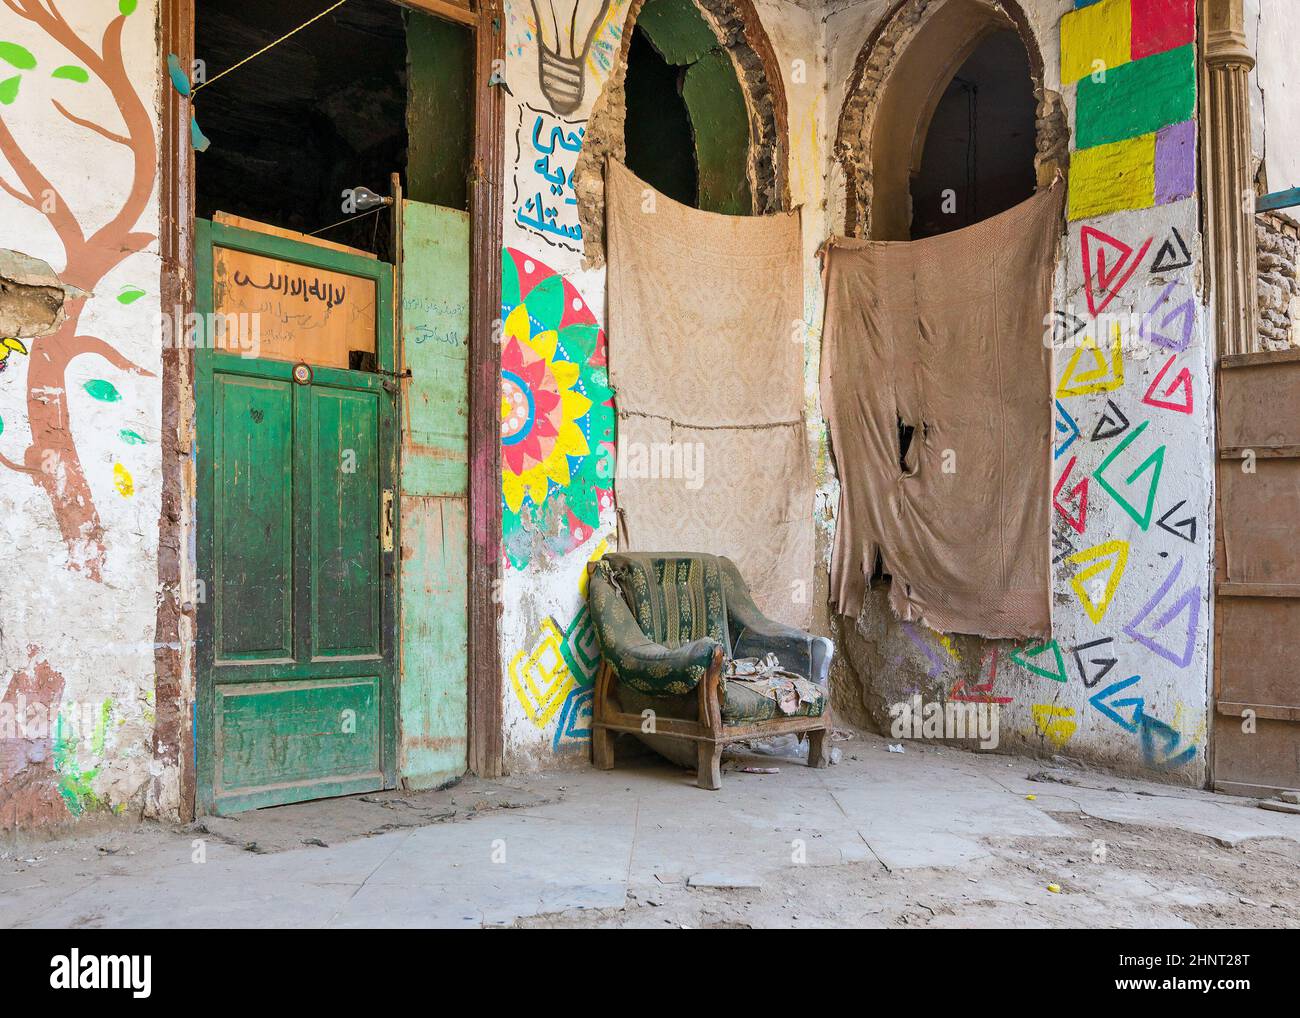 Bayt Madkour Pasha: Historical abandoned house located at Souq Al Selah Street, Darb Al Ahmar district, Old Cairo Stock Photo